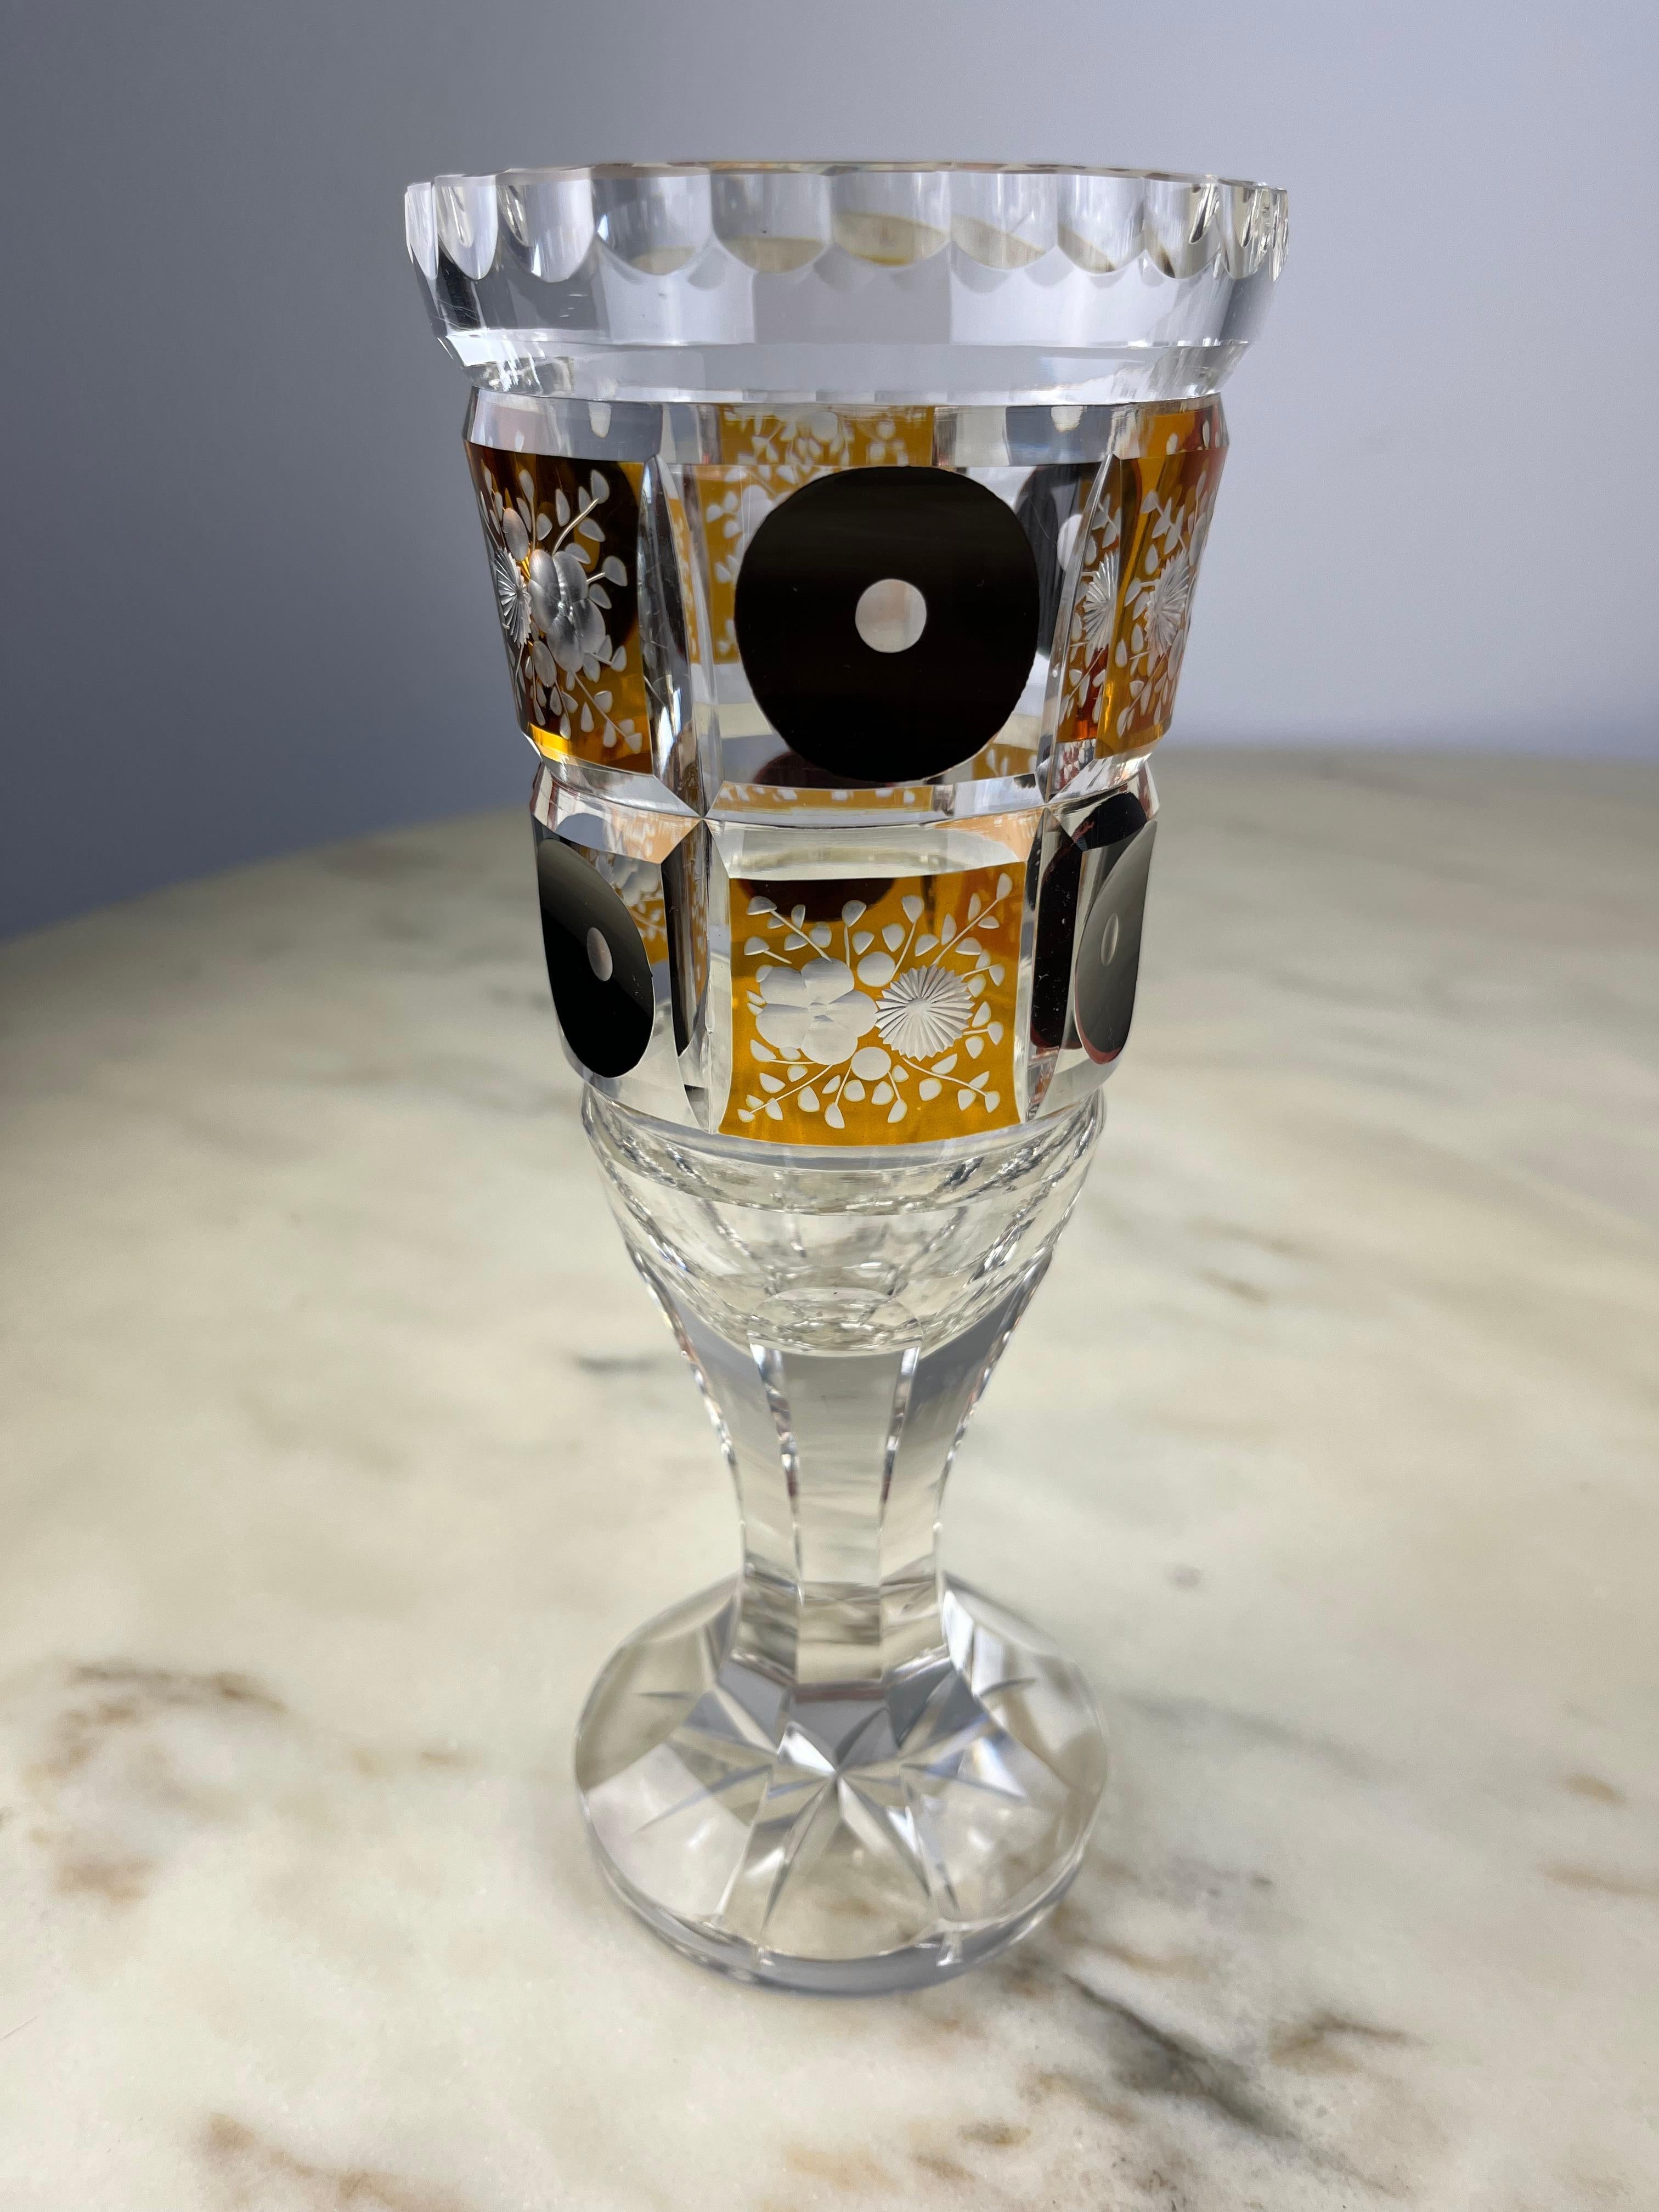 Large handcrafted Murano glass goblet, Italy, 1980s.
Belonged to my grandparents, purchased and always displayed without being used. Intact, very small signs of ageing.